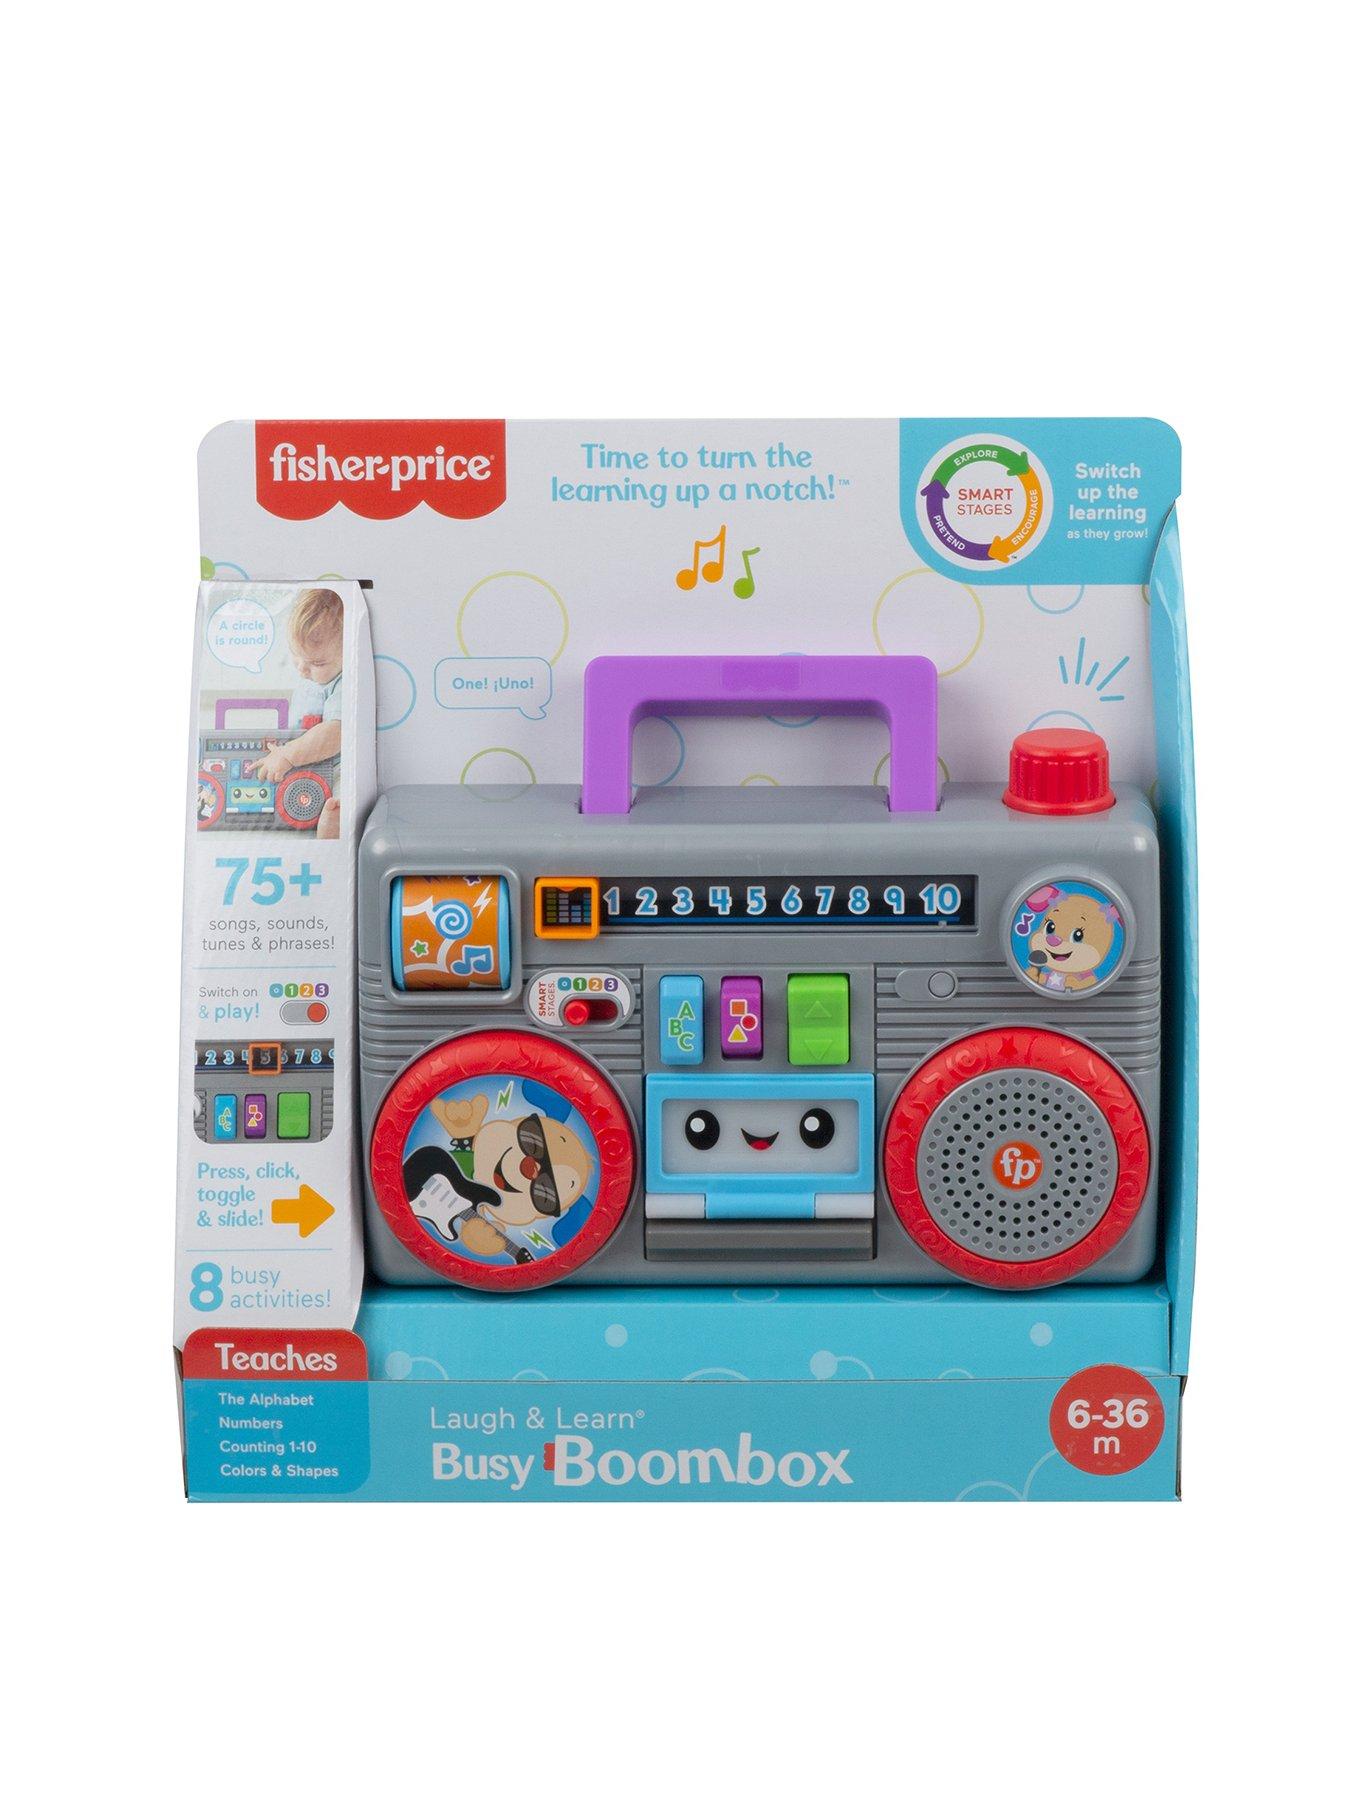 VTech® Tune & Learn Boombox™ Take-Along Music Toy for Toddlers